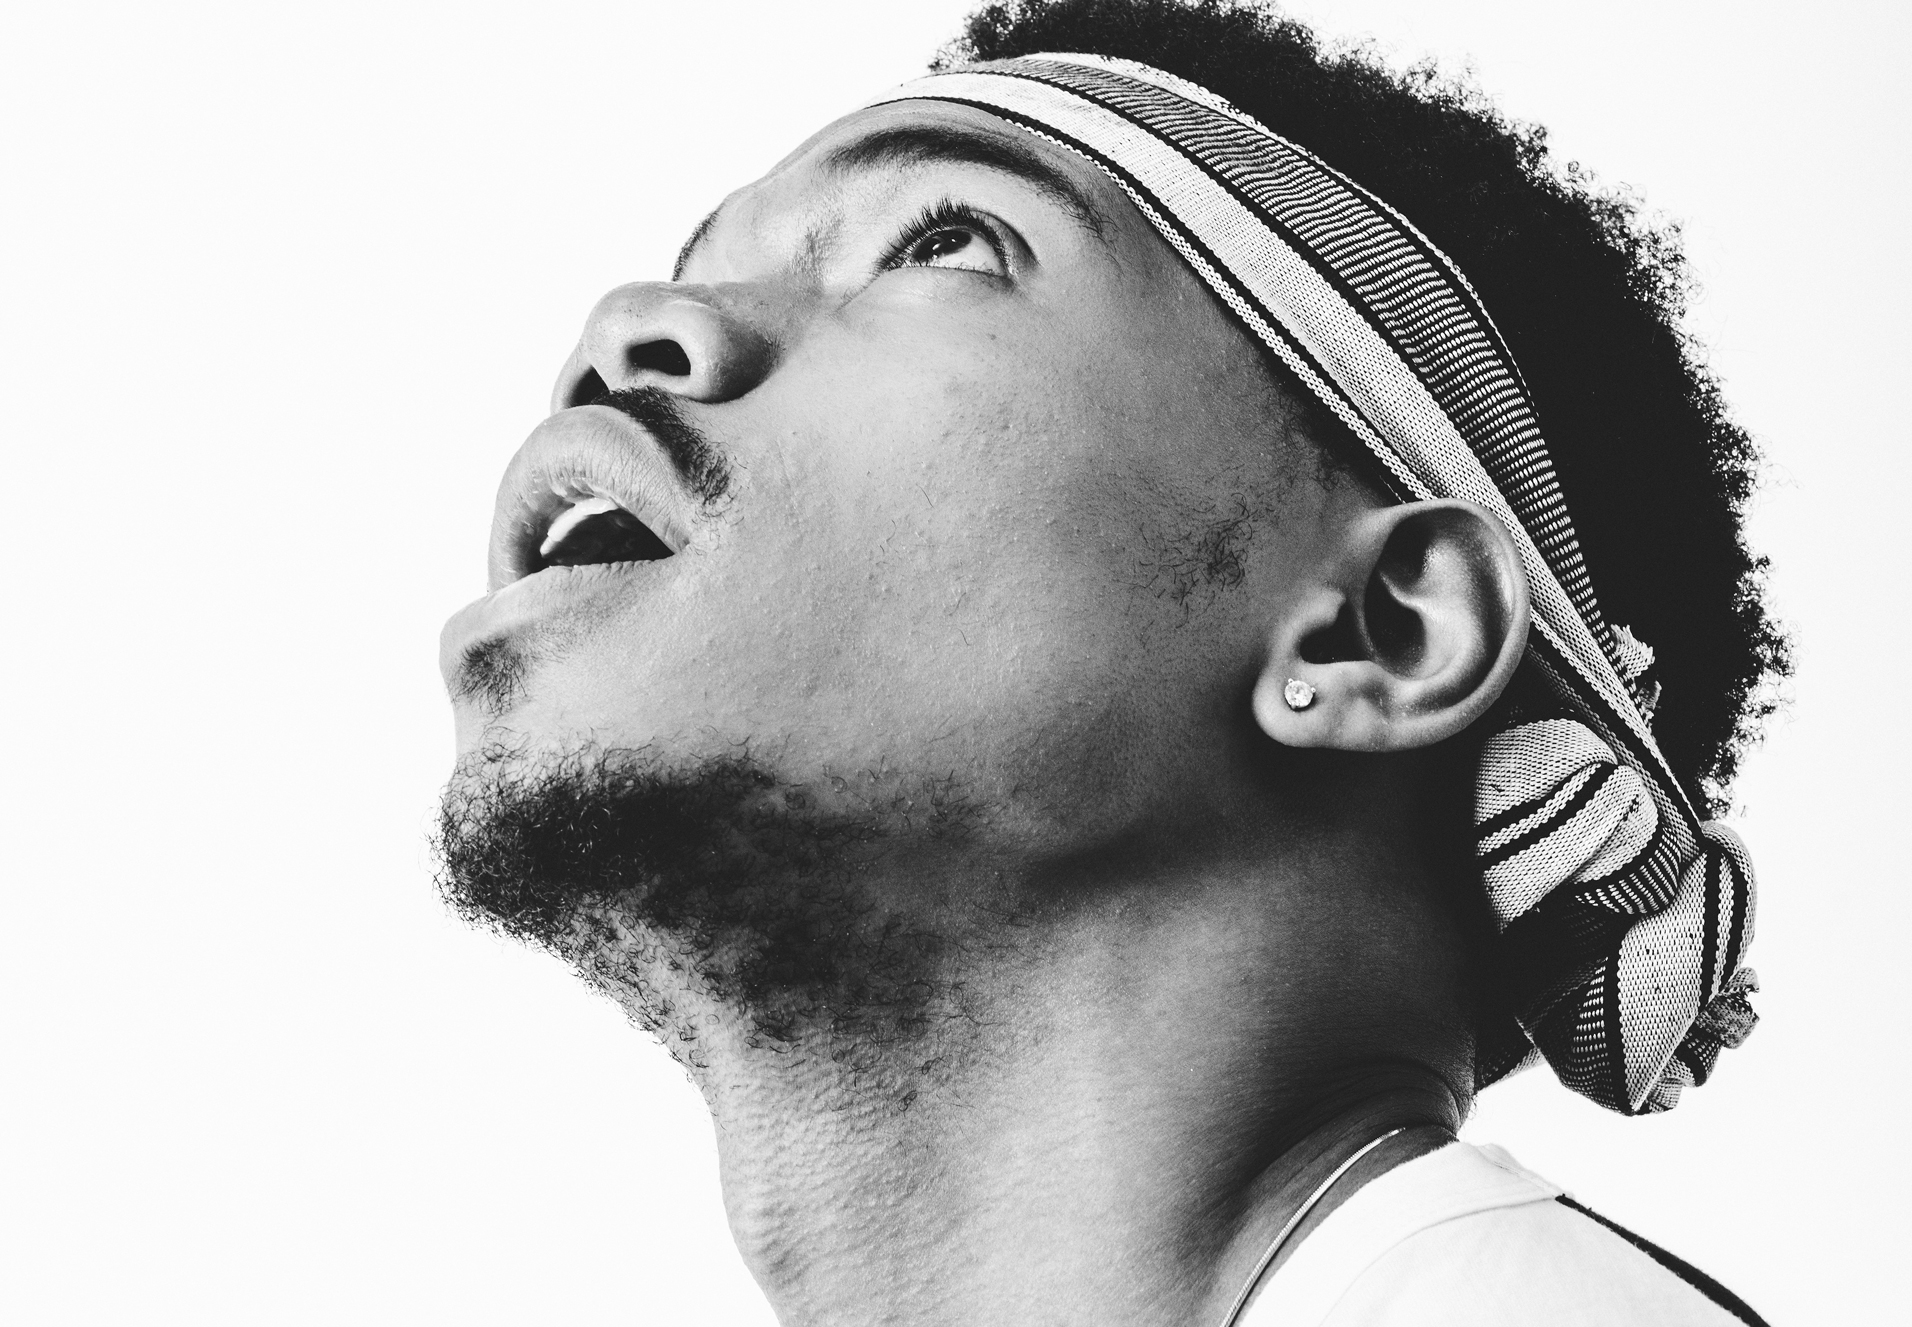 Chance The Rapper, Harts, Hot Chip announced for Beyond The Valley 2016